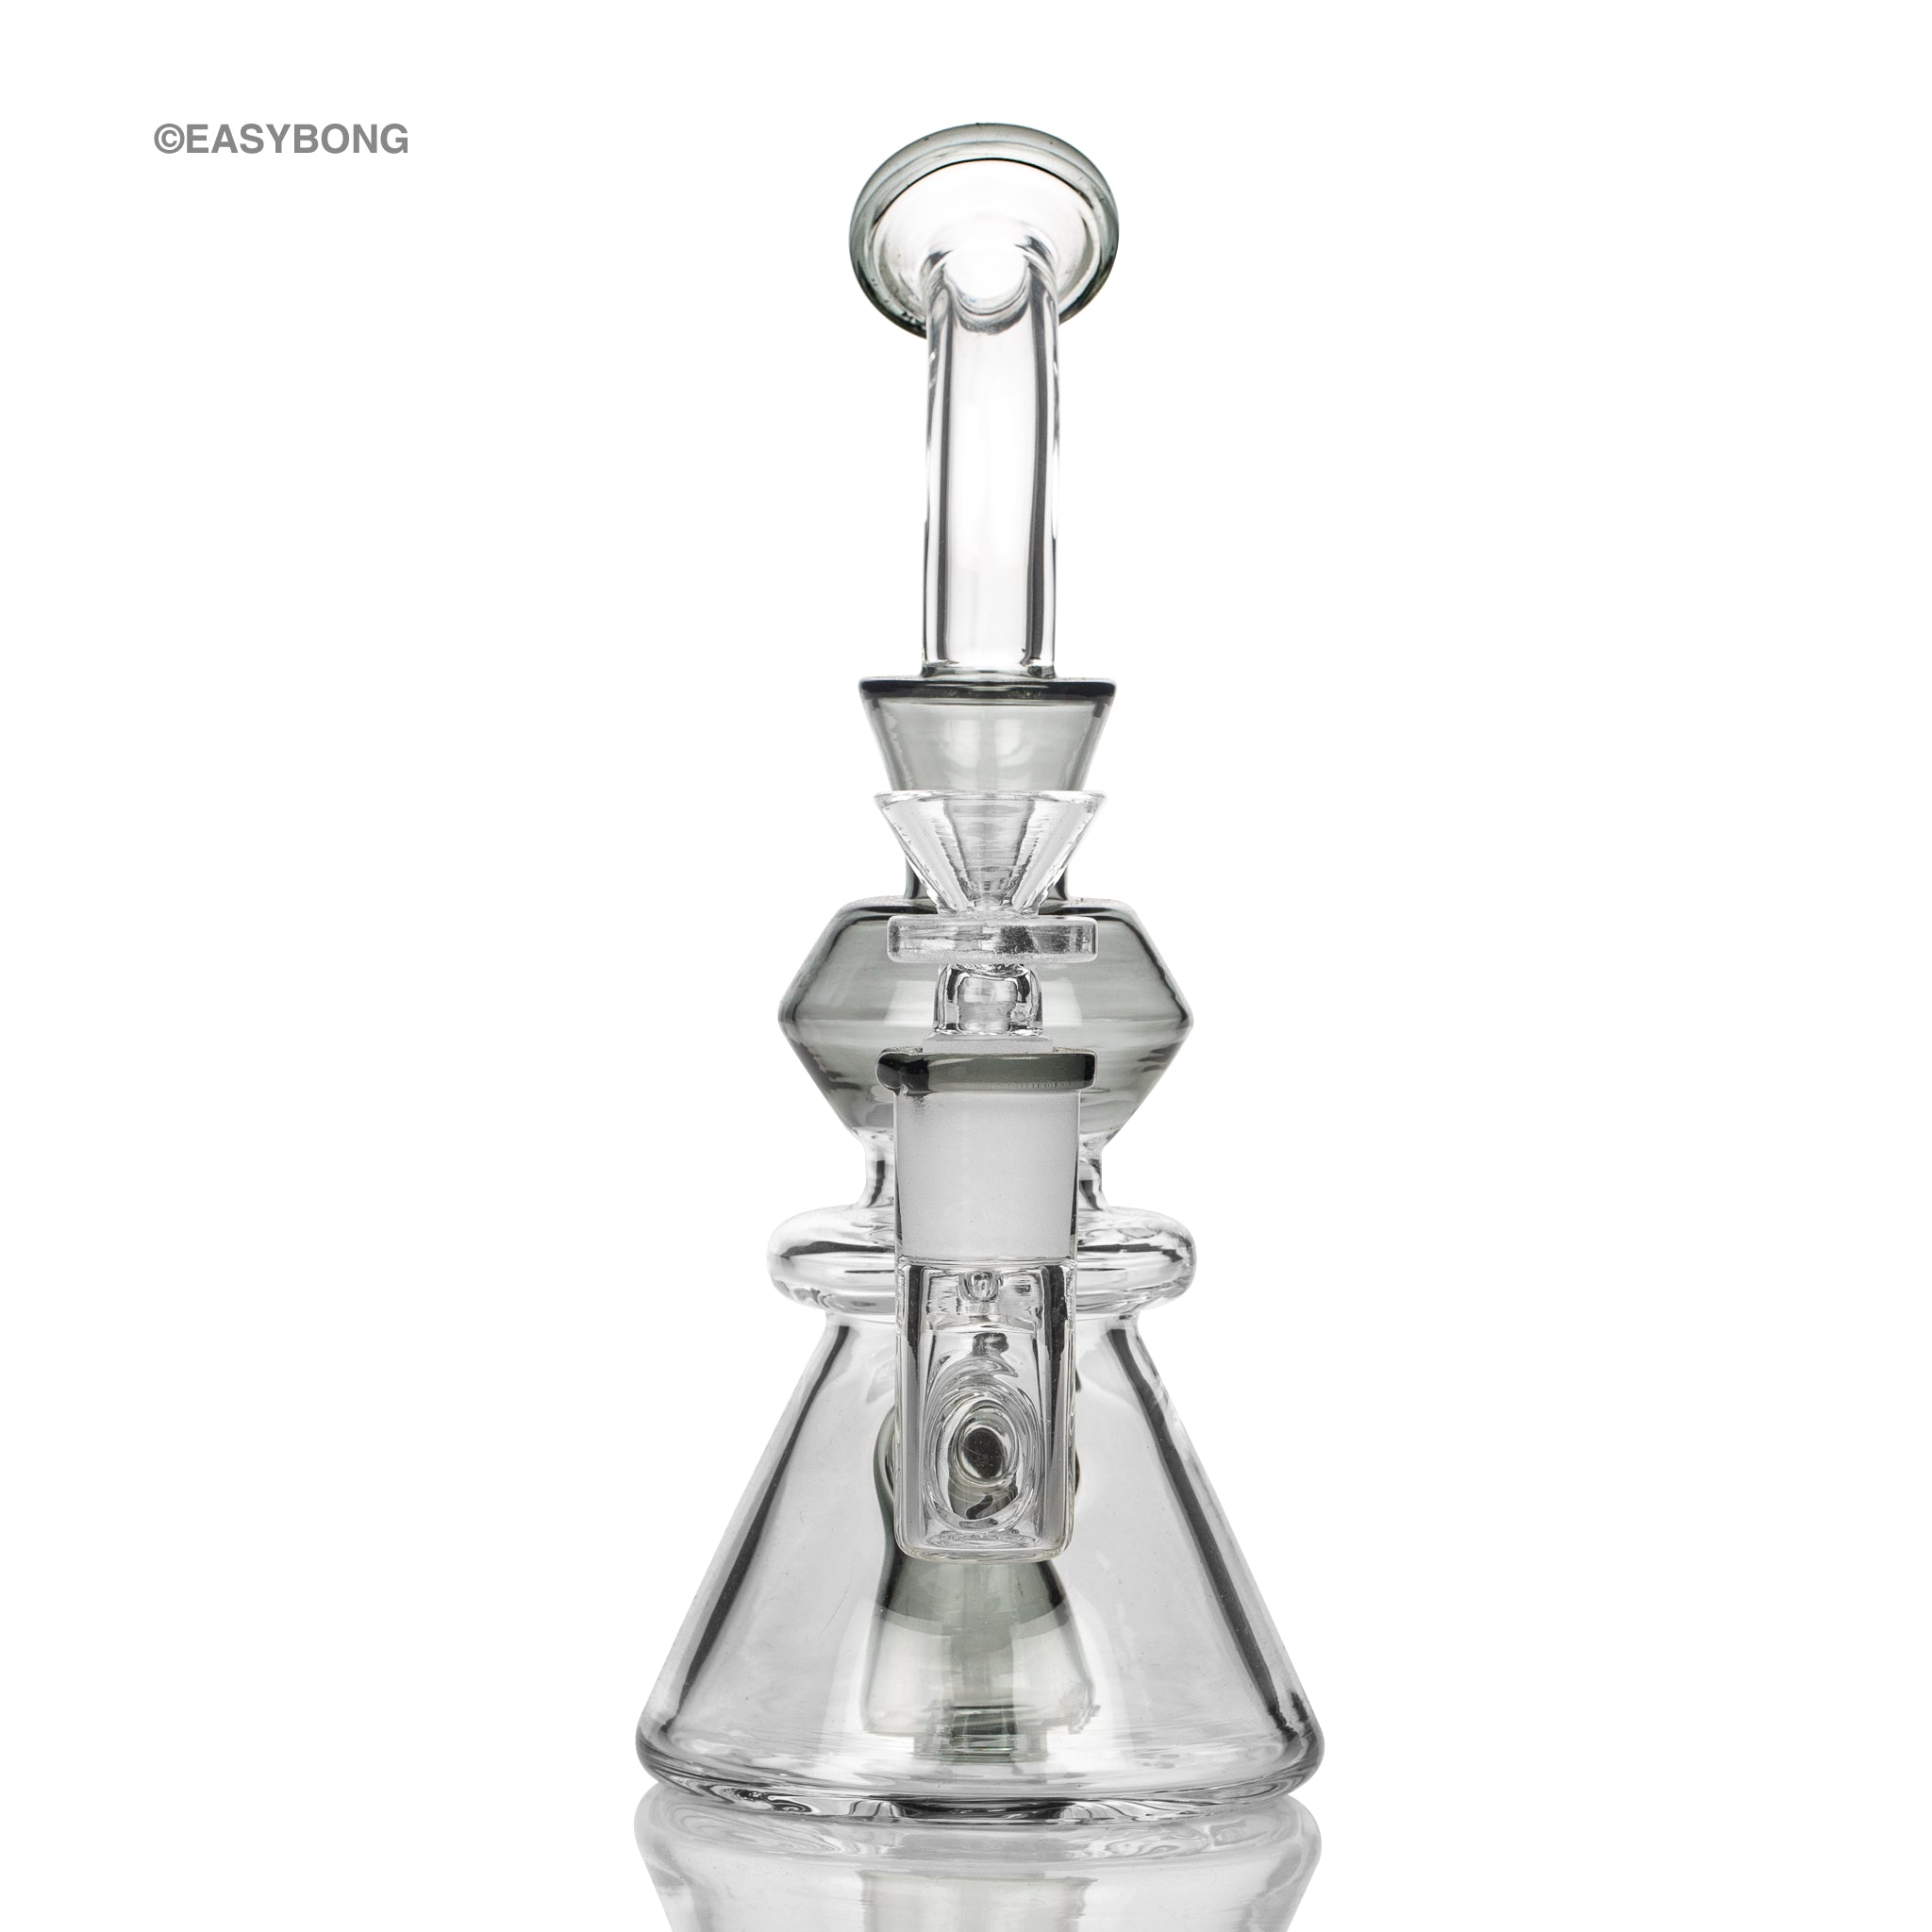 Little banger hanger or dab rig which can be used to smoke medicinal cannabis oils in Australia.